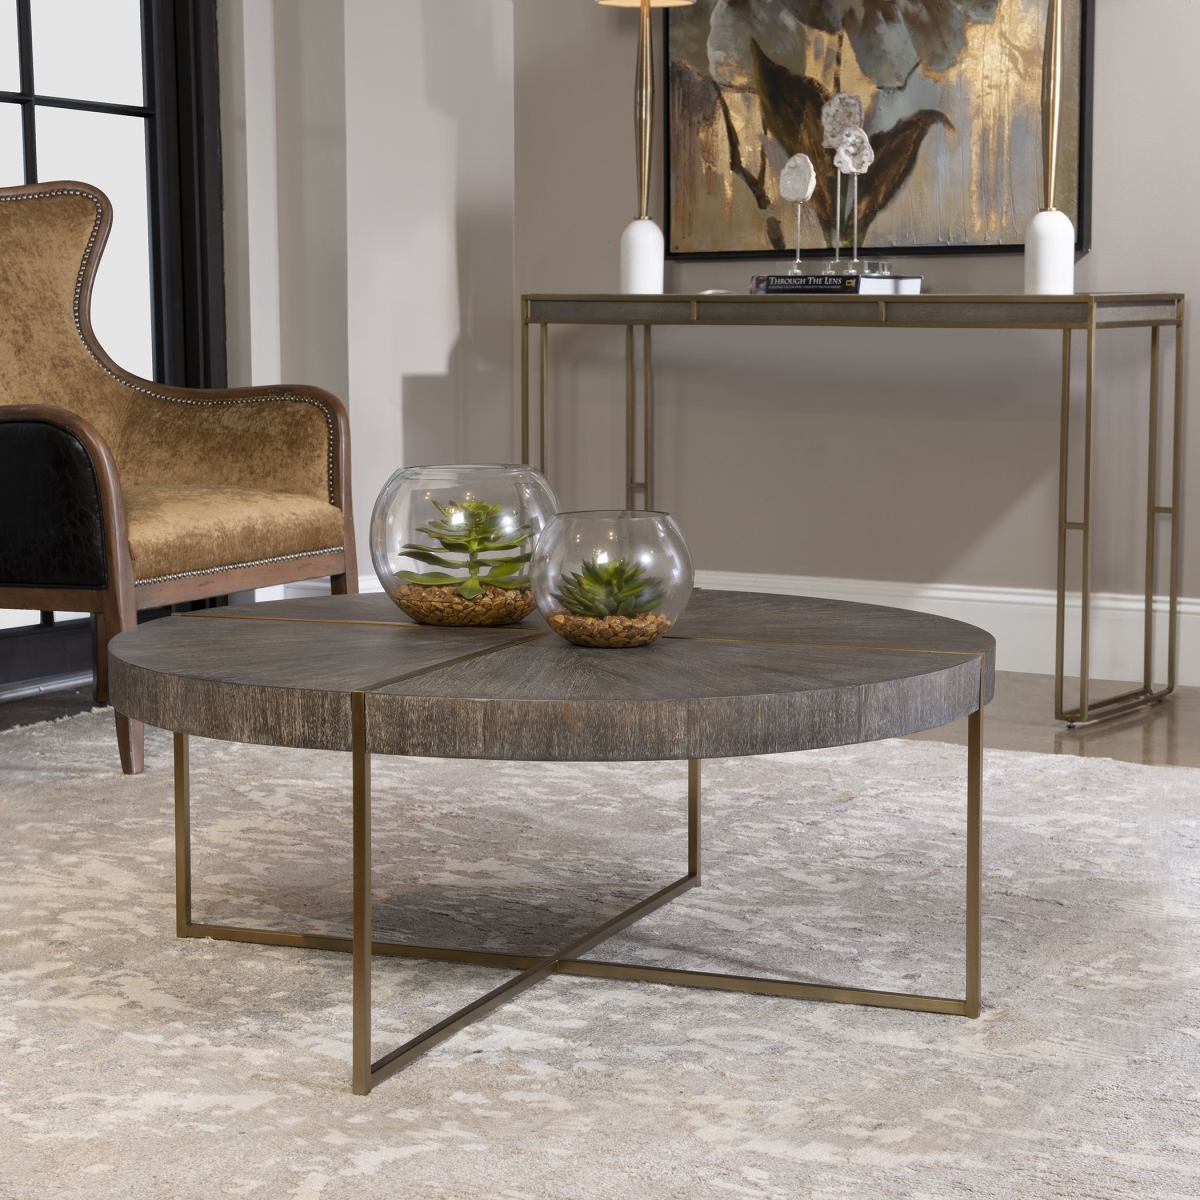 Picture of 212 Main 25378 40 x 48 x 25 in. Taja Round Coffee Table